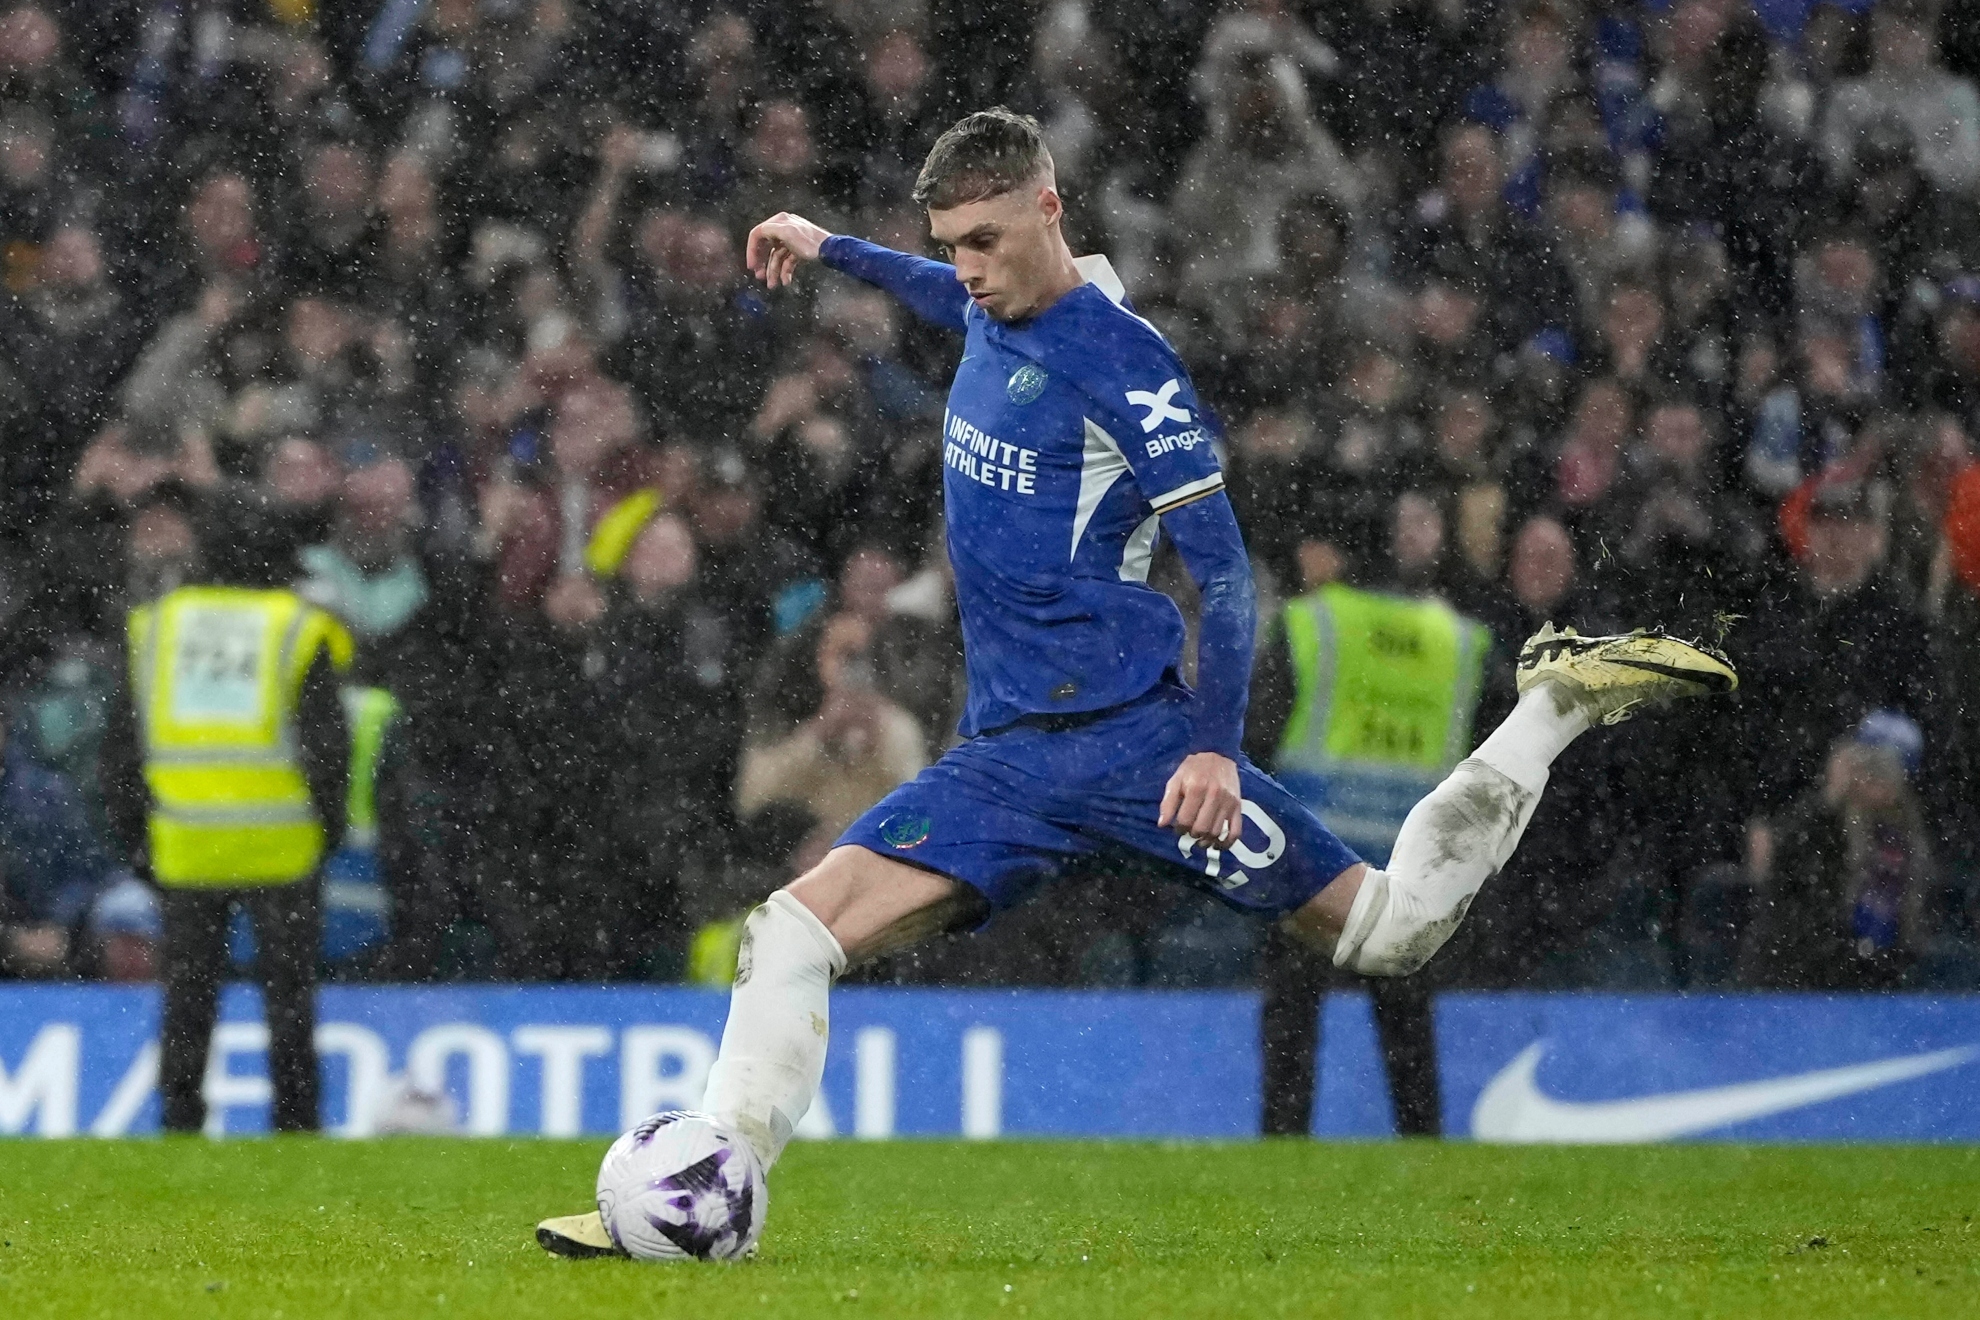 Chelseas Cole Palmer scores his sides third goal during the English Premier League soccer match between Chelsea and Manchester United